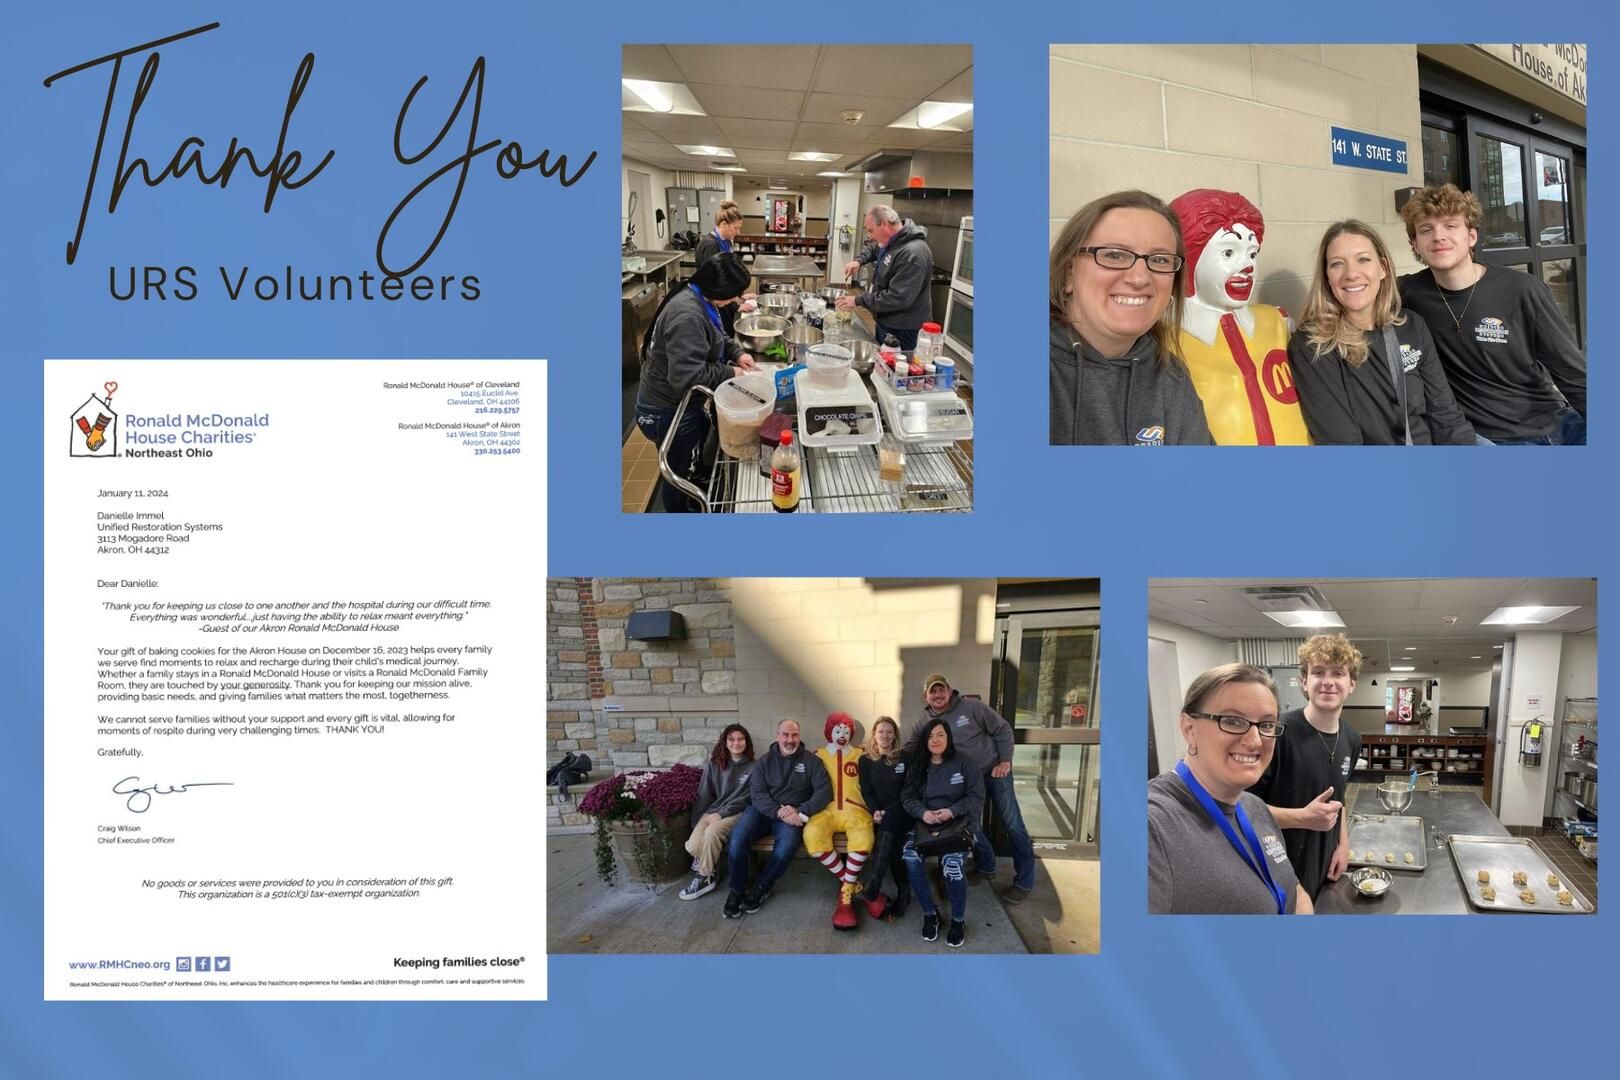 Ronald Mcdonald House Charities thank you letter to Unified Restoration Systems Volunteers